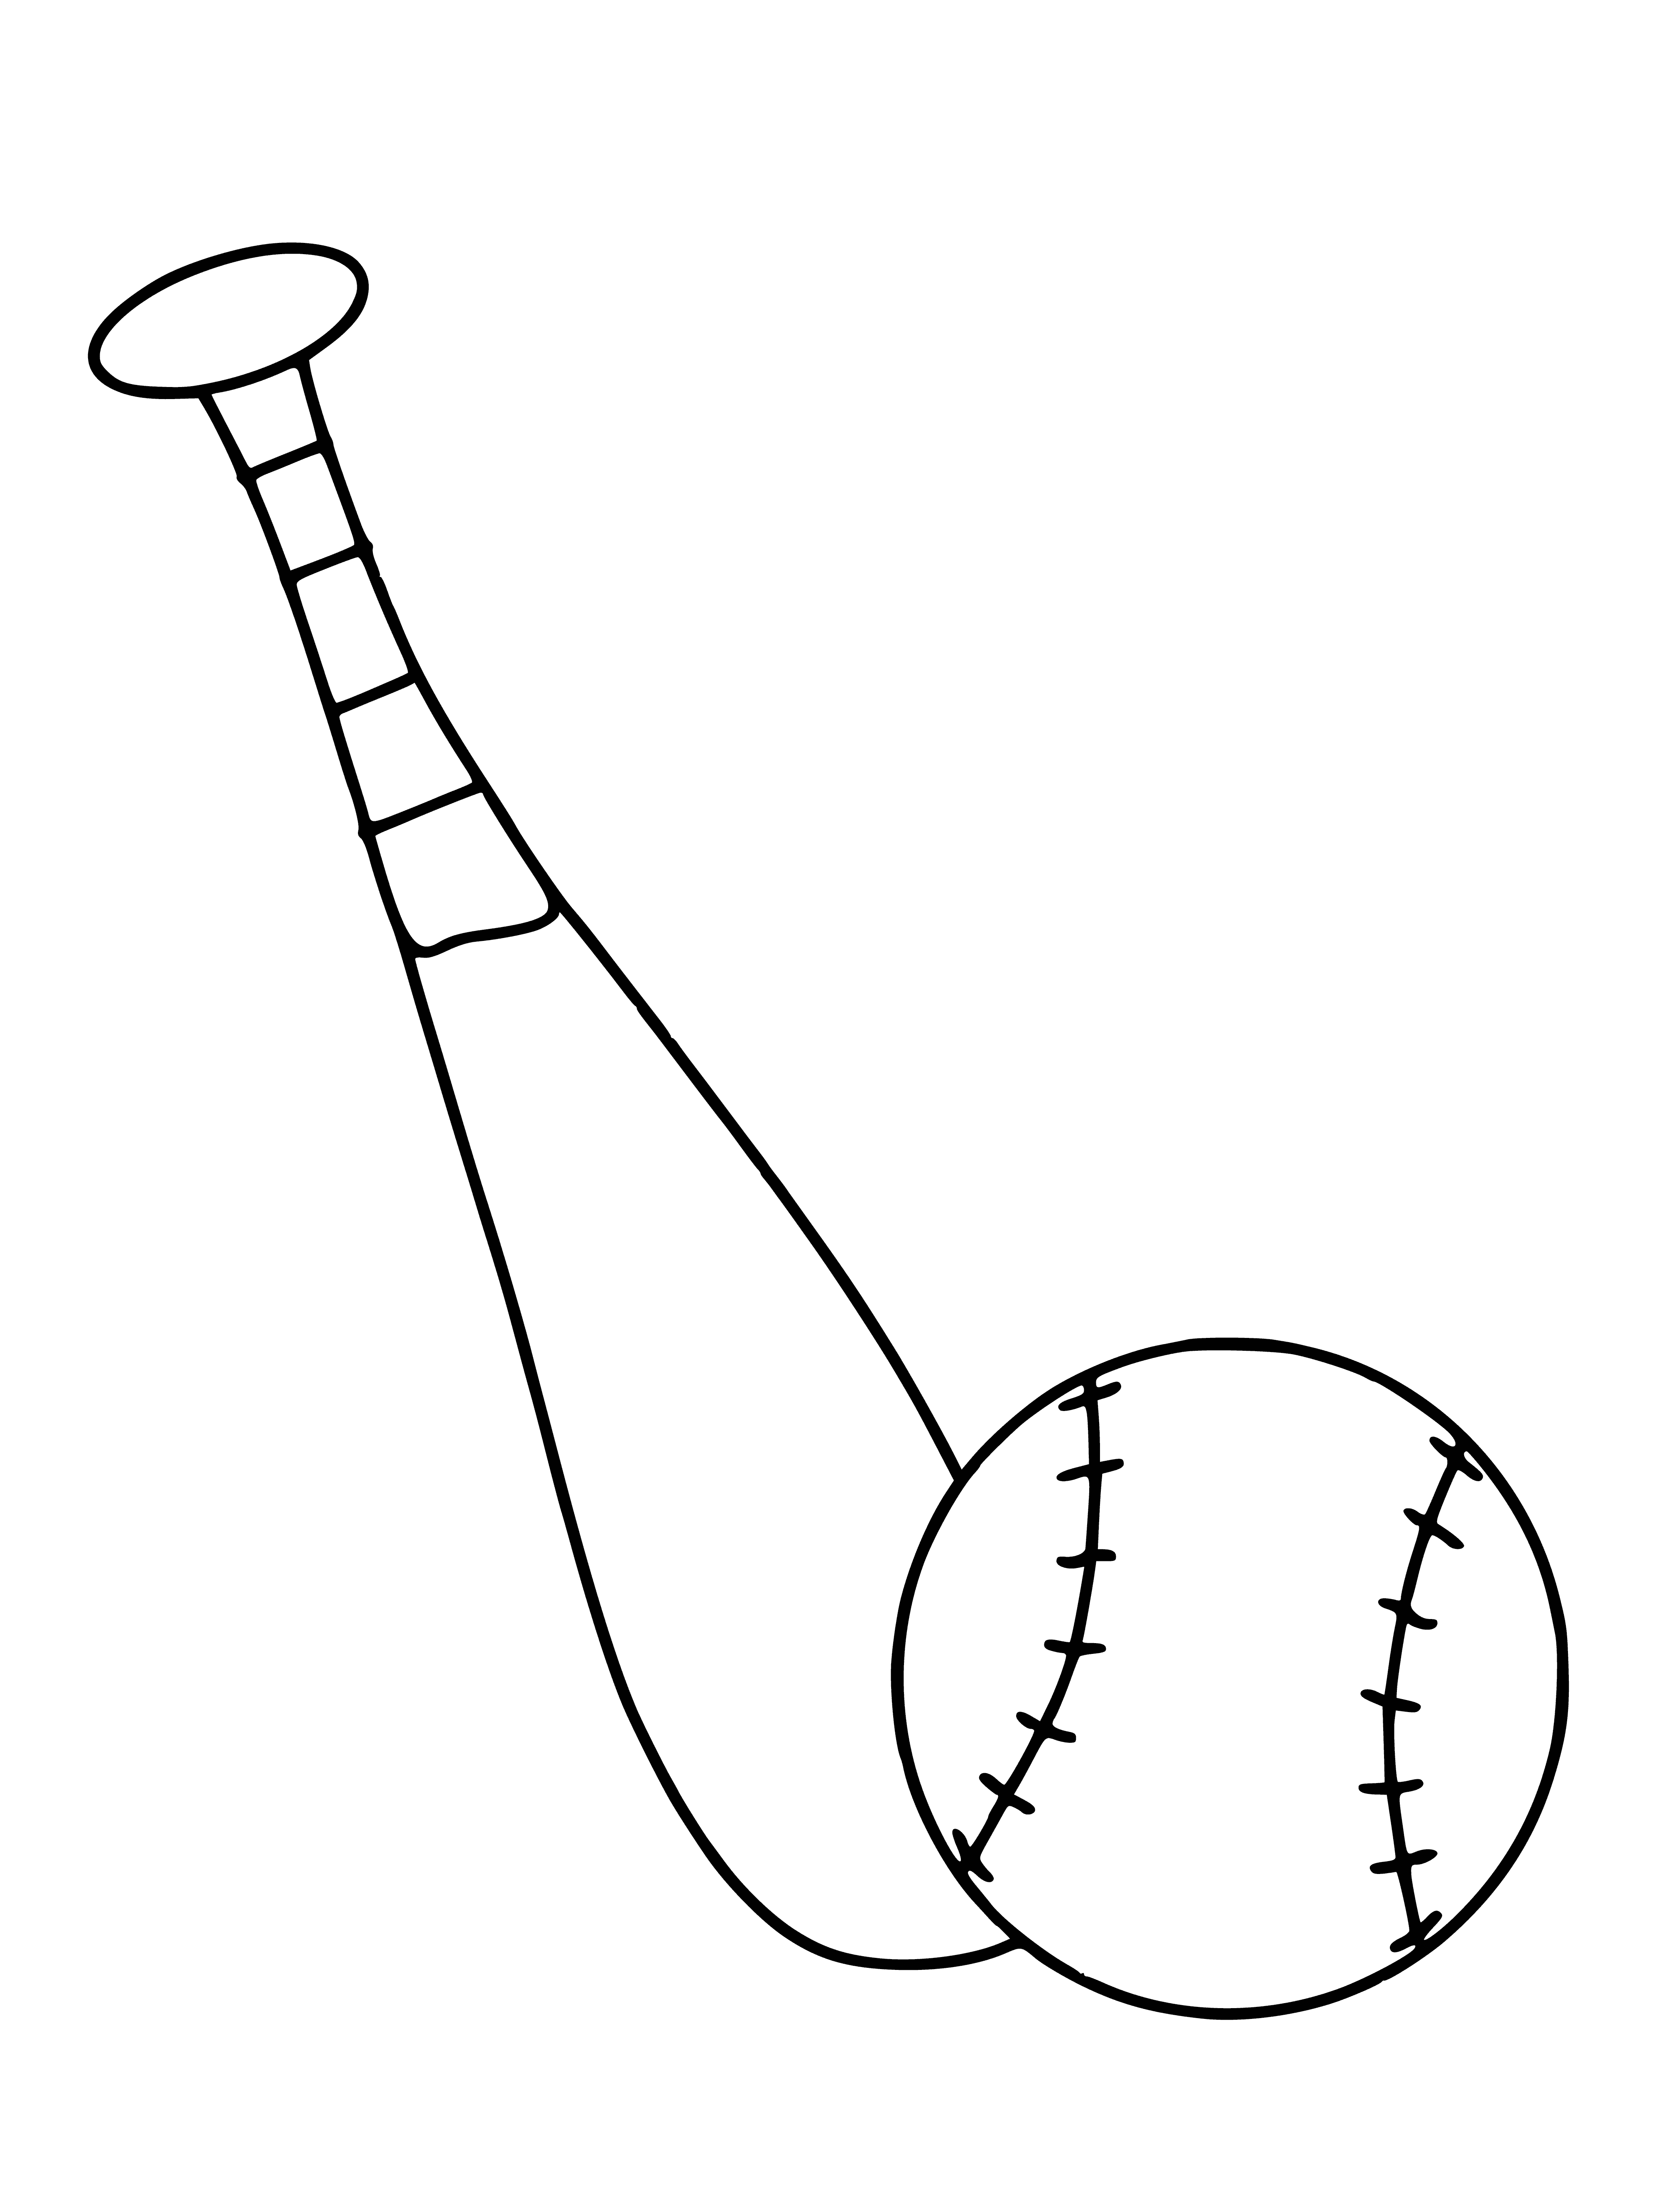 coloring page: White painted stick w/ black grip, small round white item w/ red stitching.